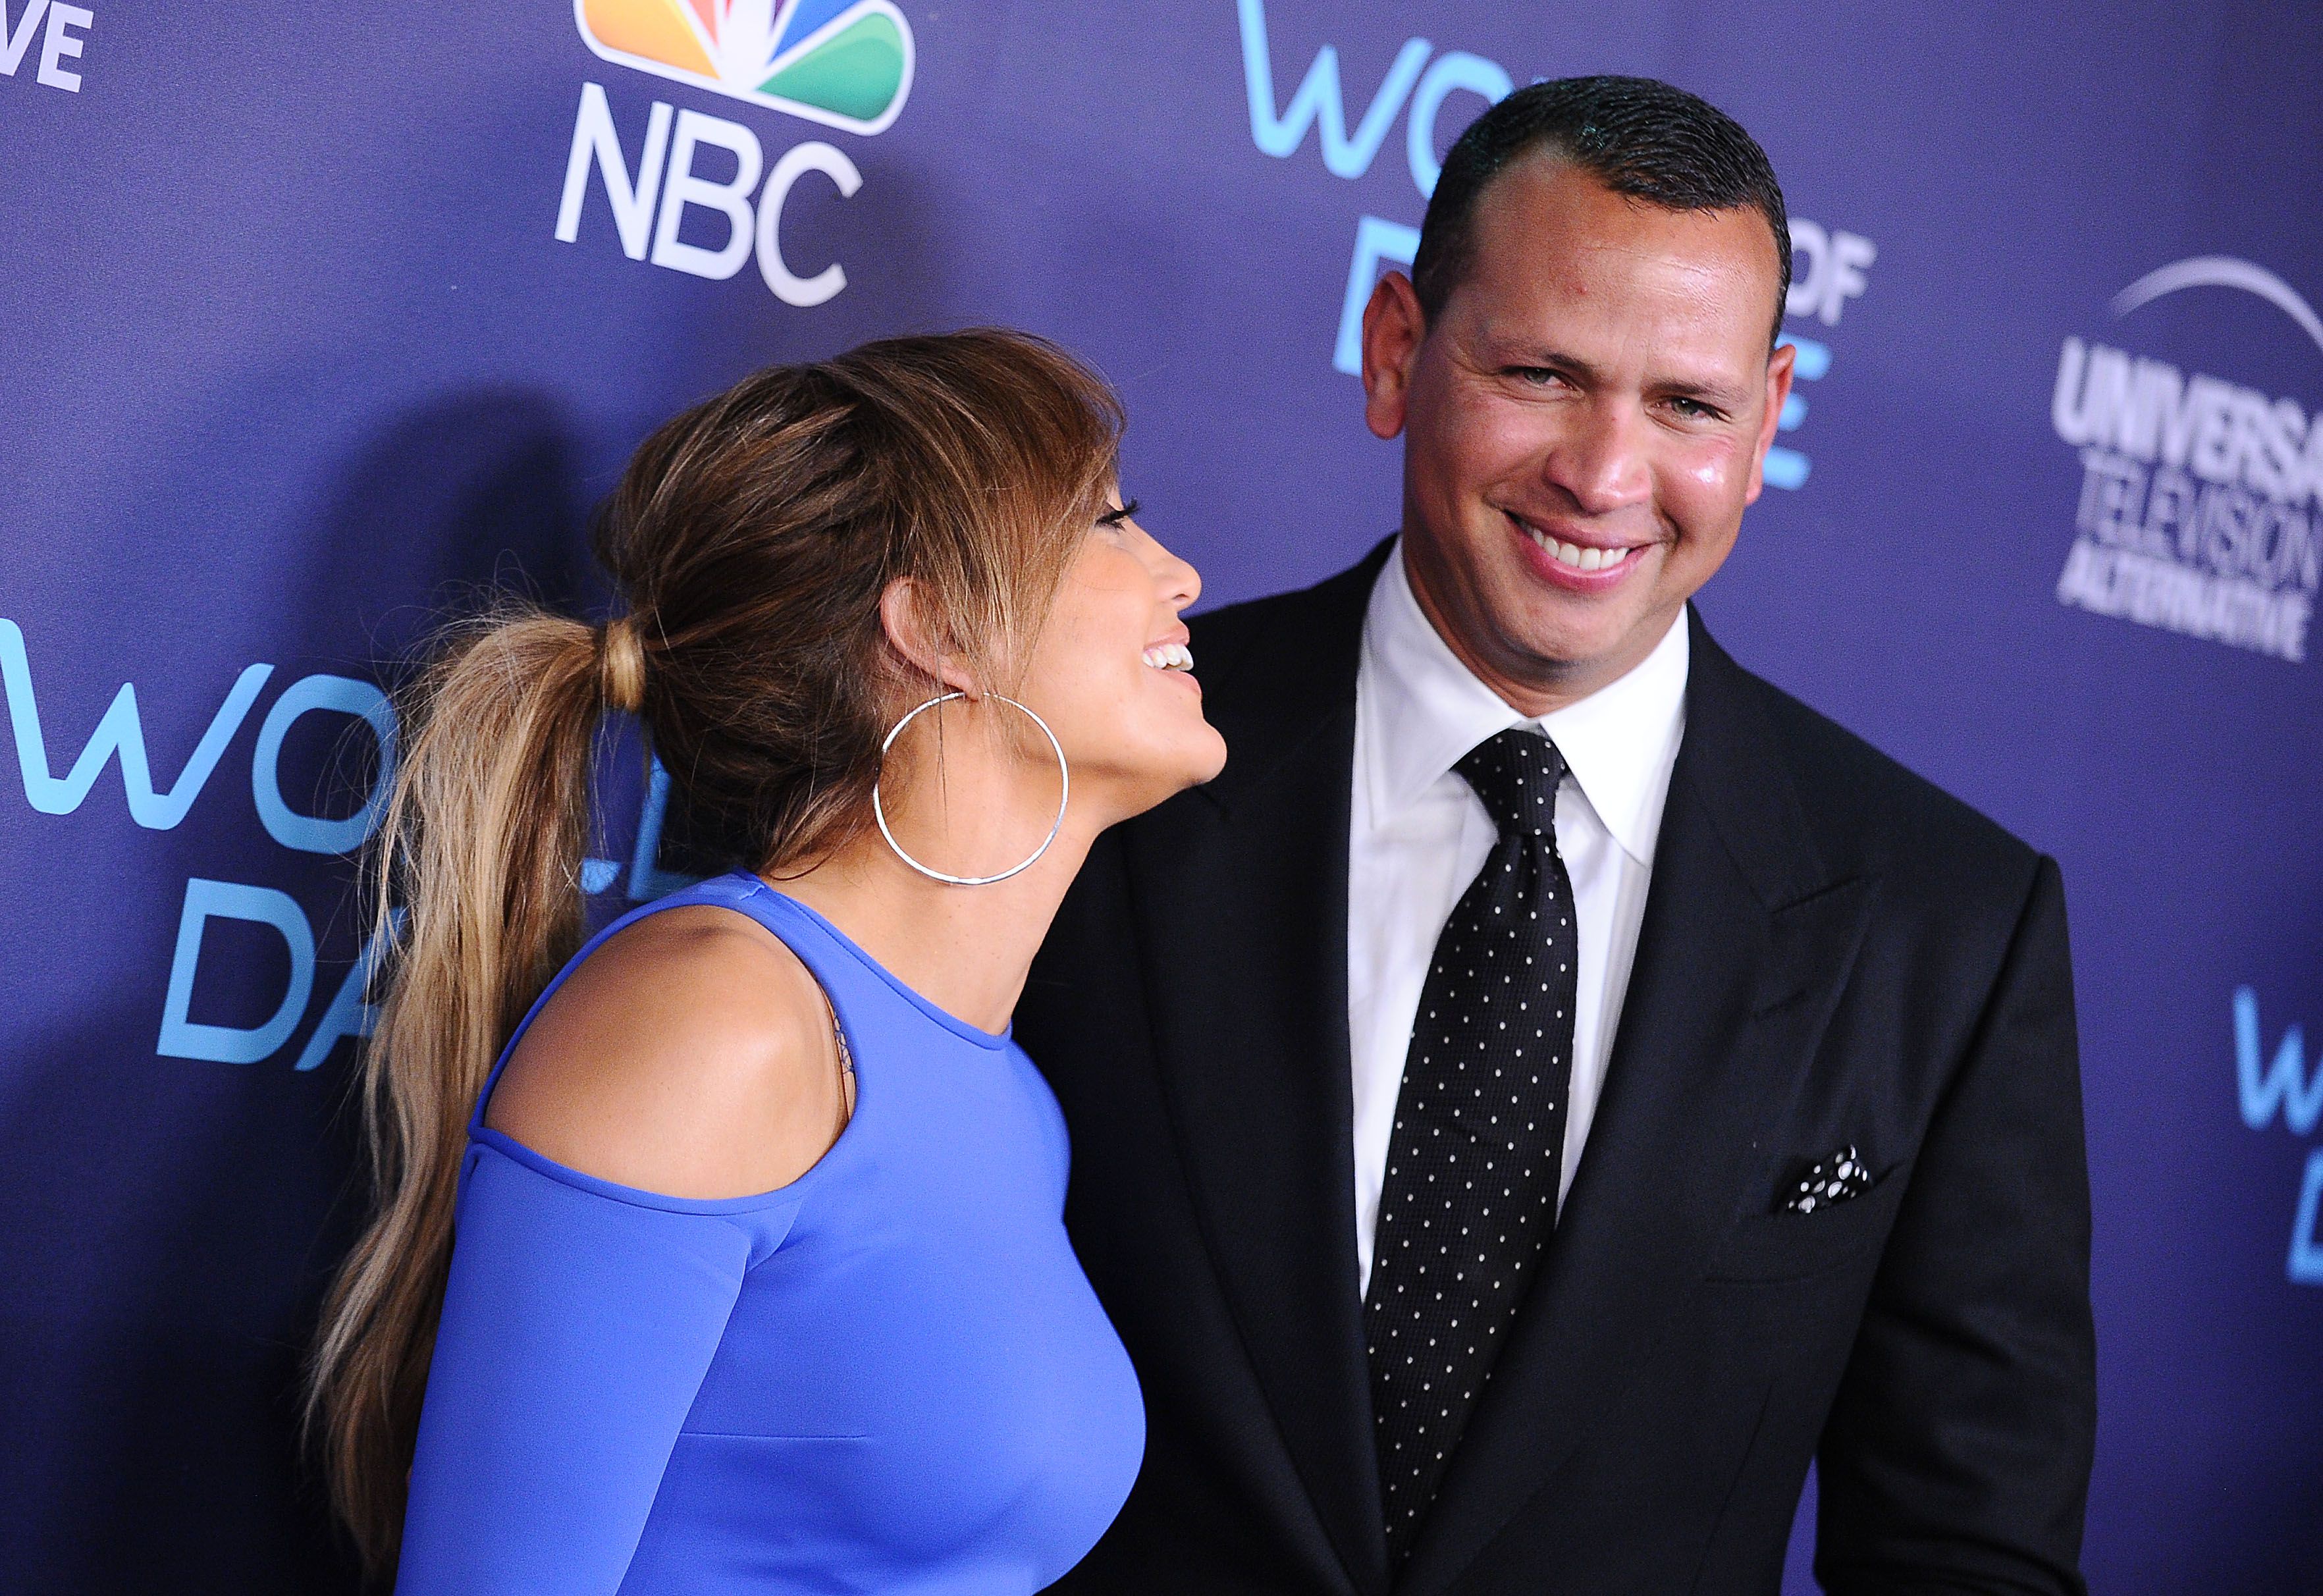 What J.Lo and Alex Rodriguez's Engagement Says About Family